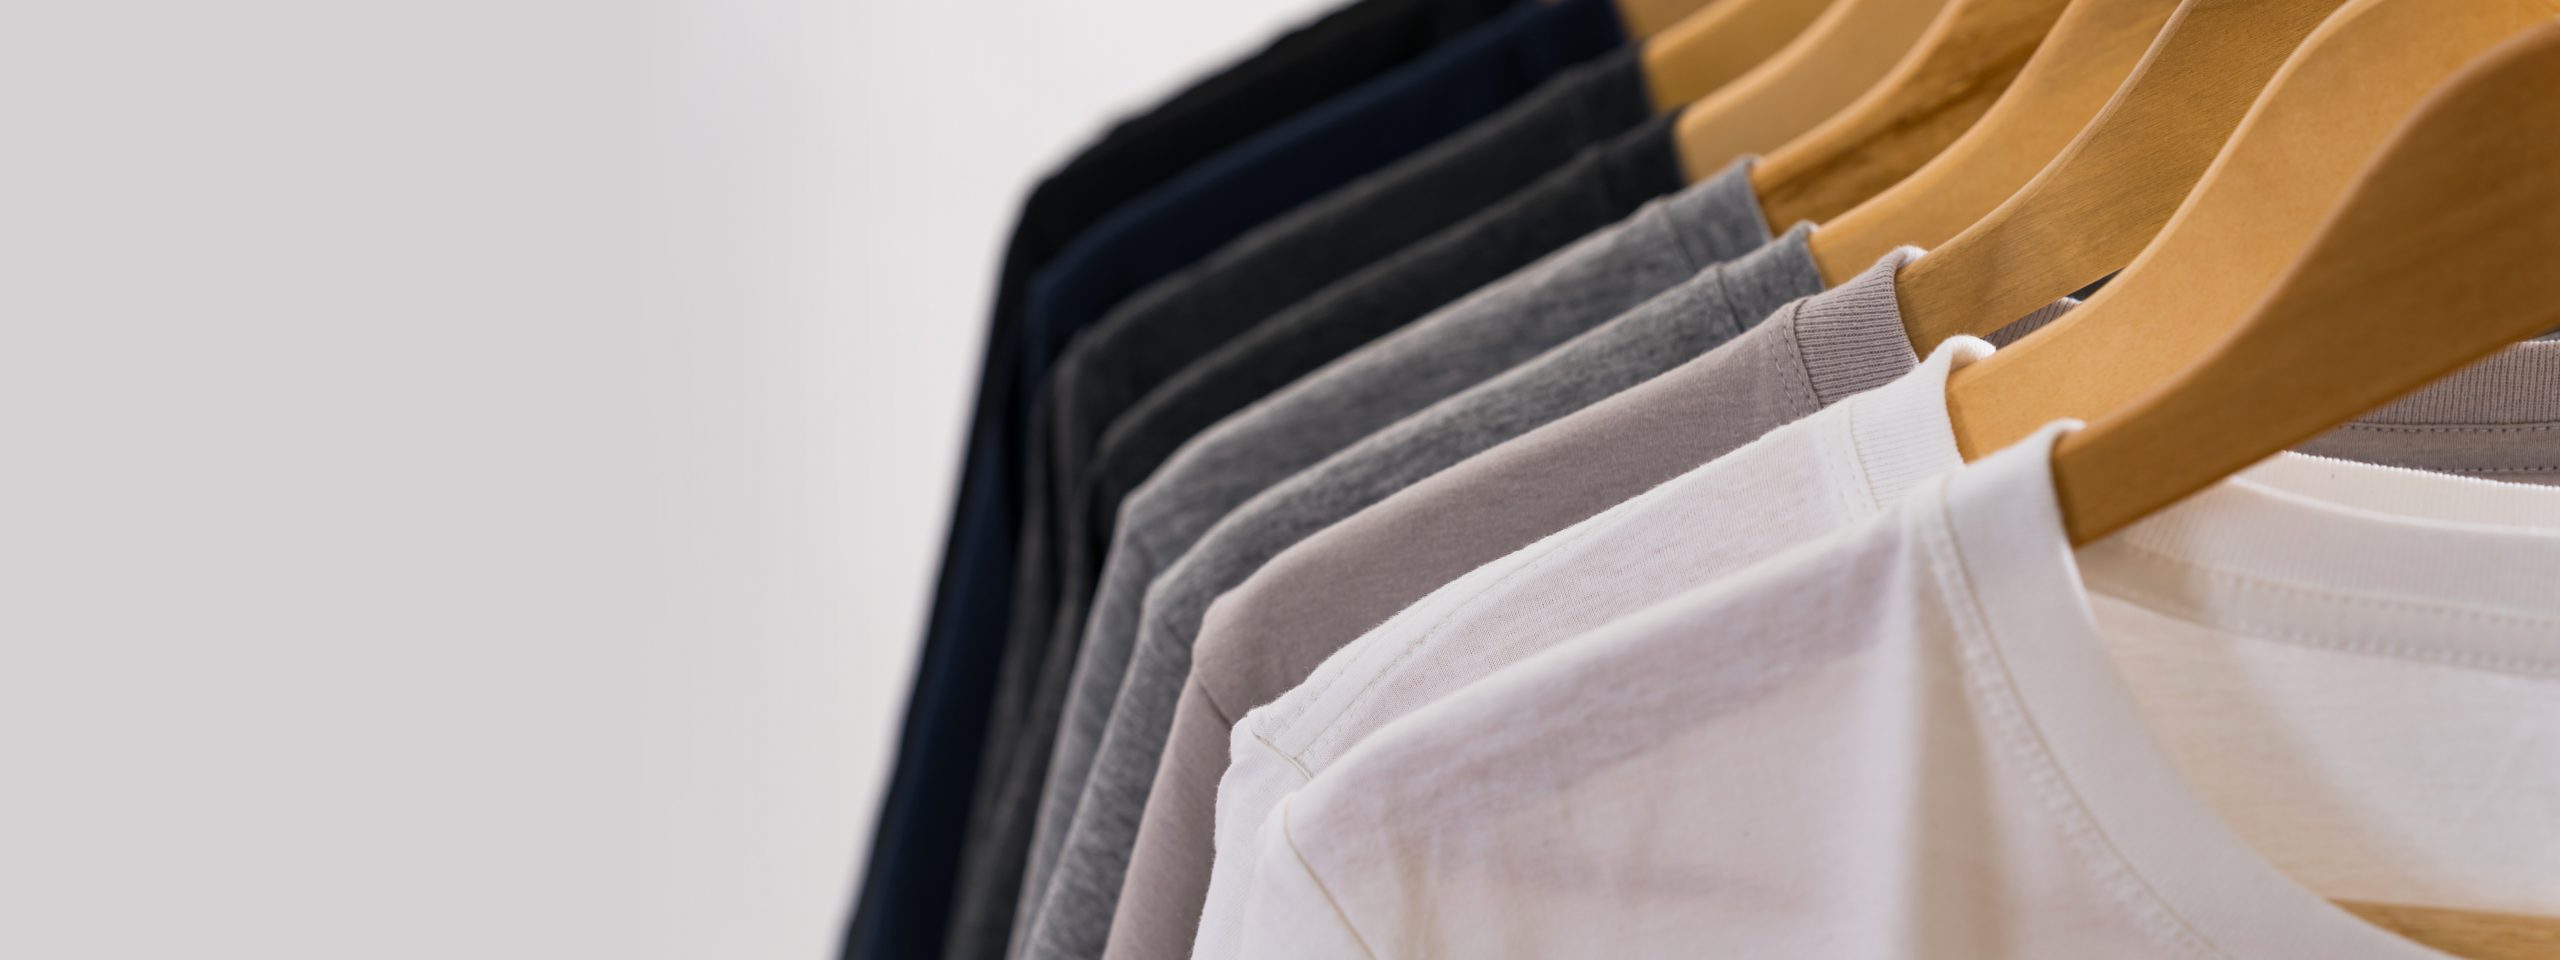 Close up of T-shirts on hangers, apparel background